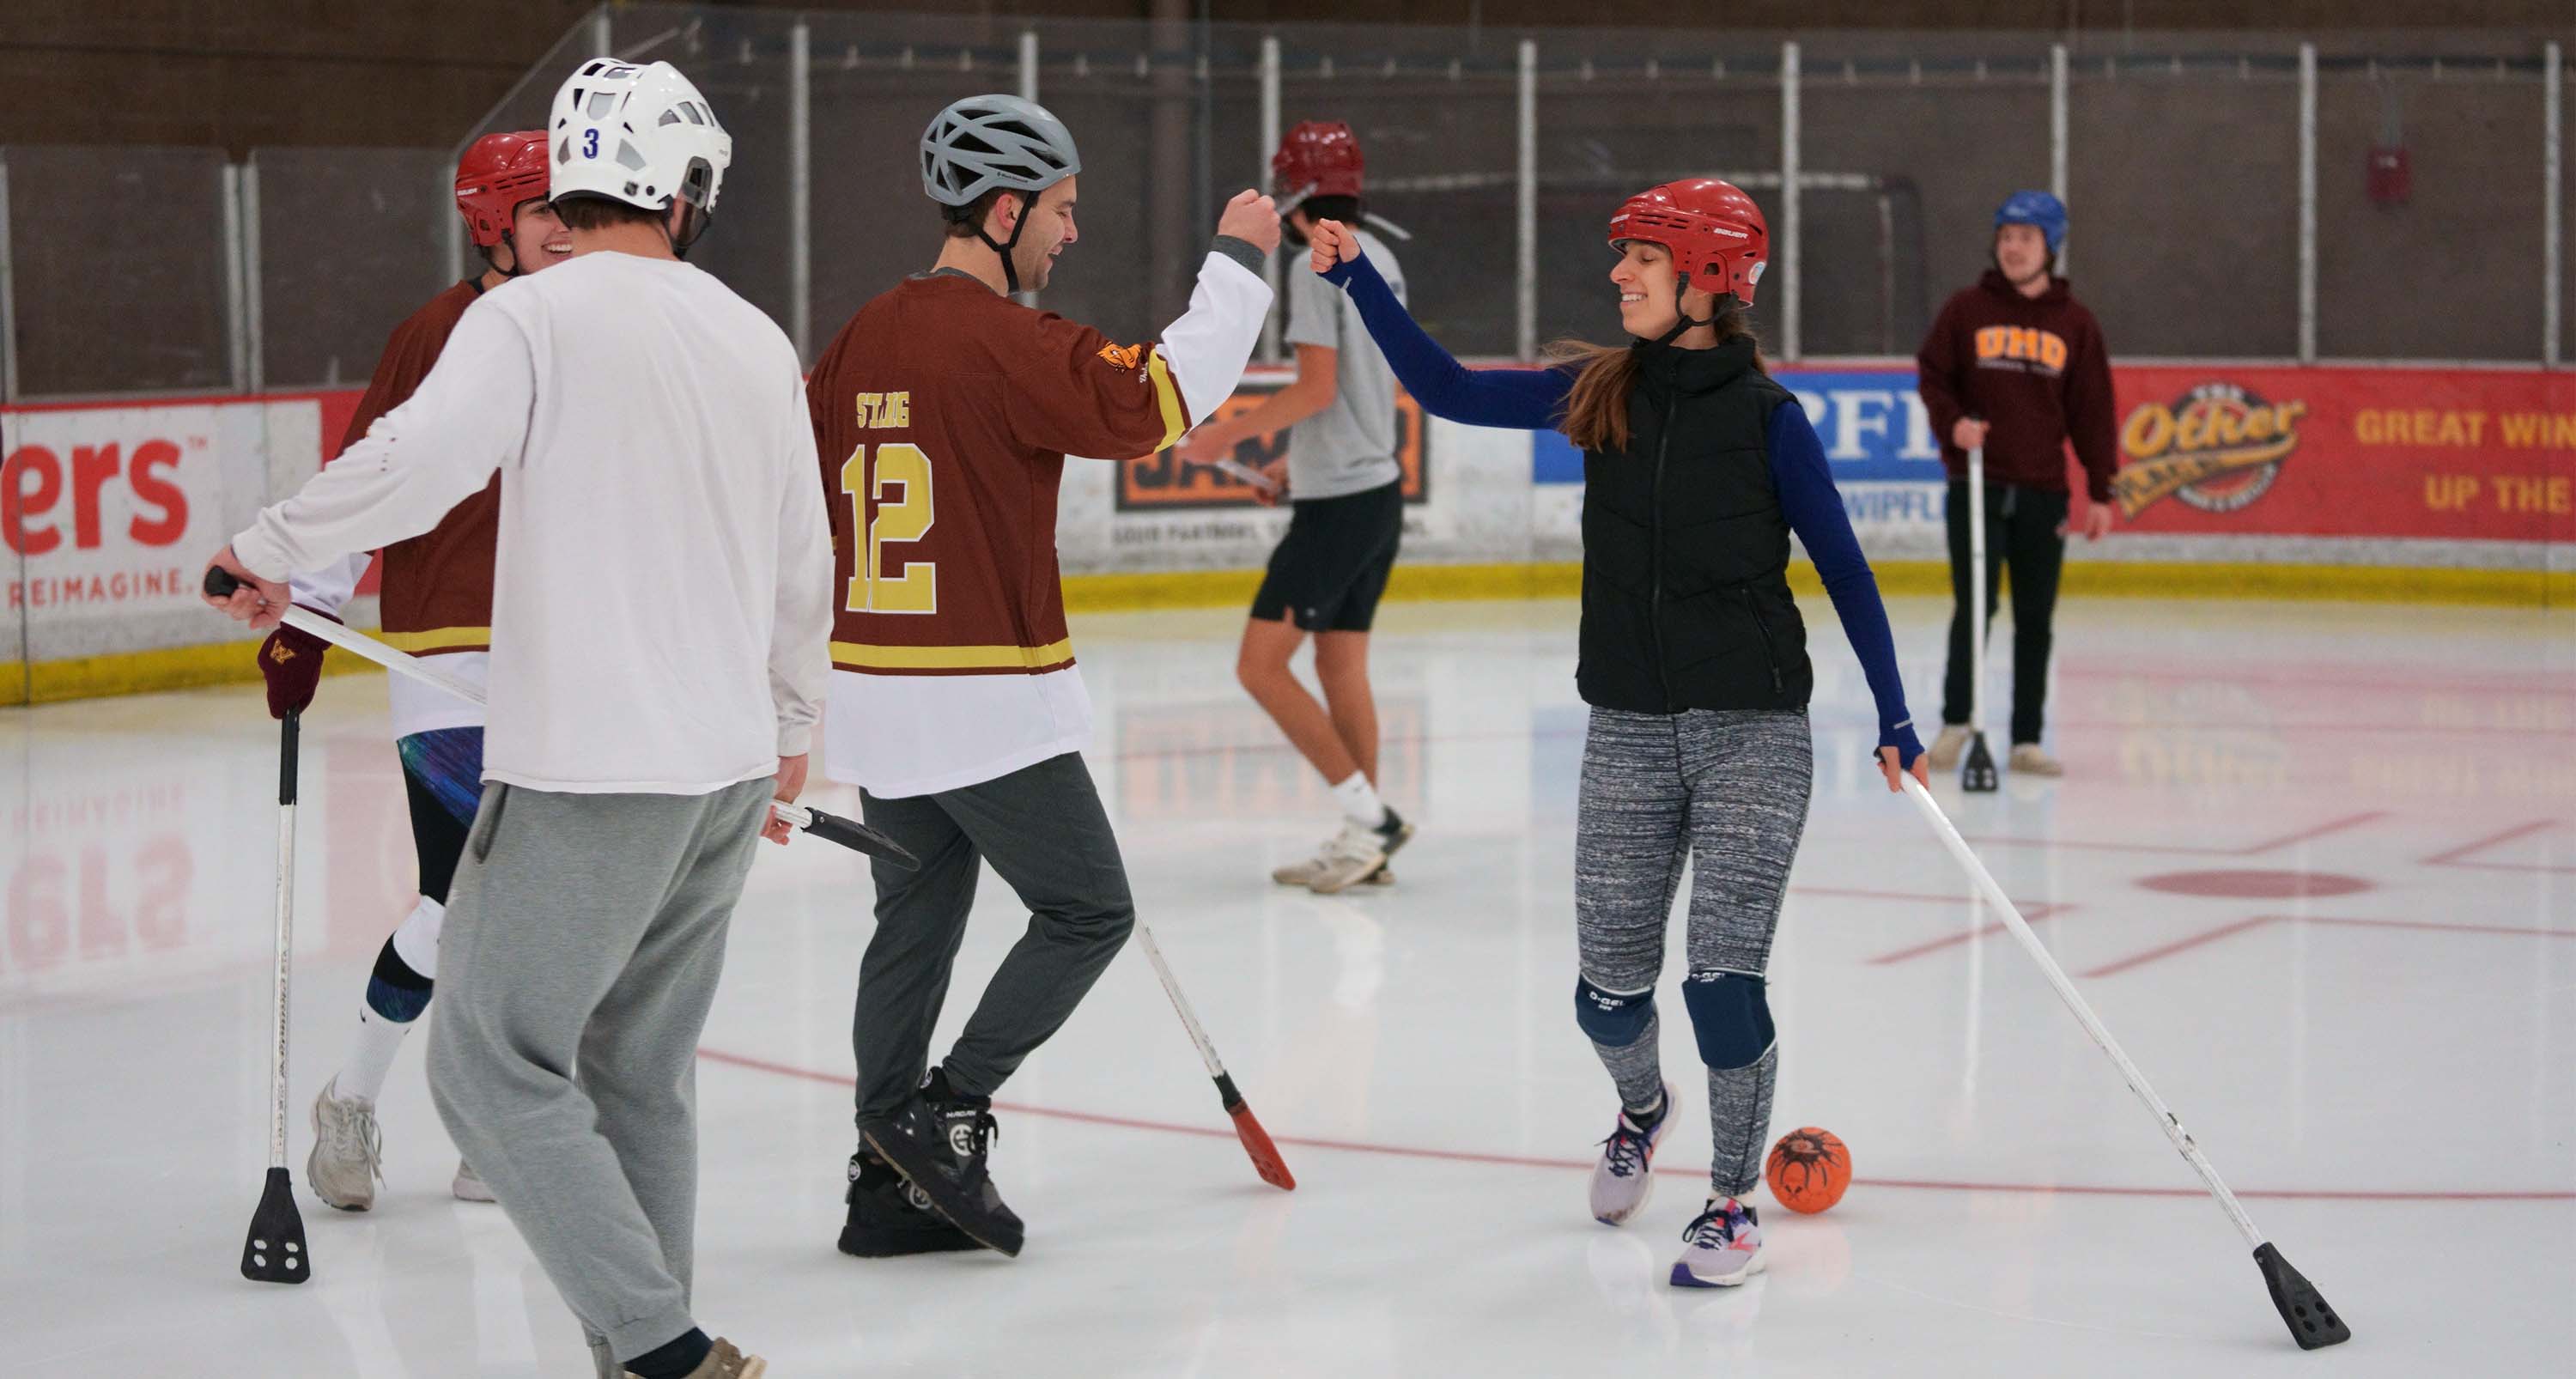 students playing broomball and fist bumping